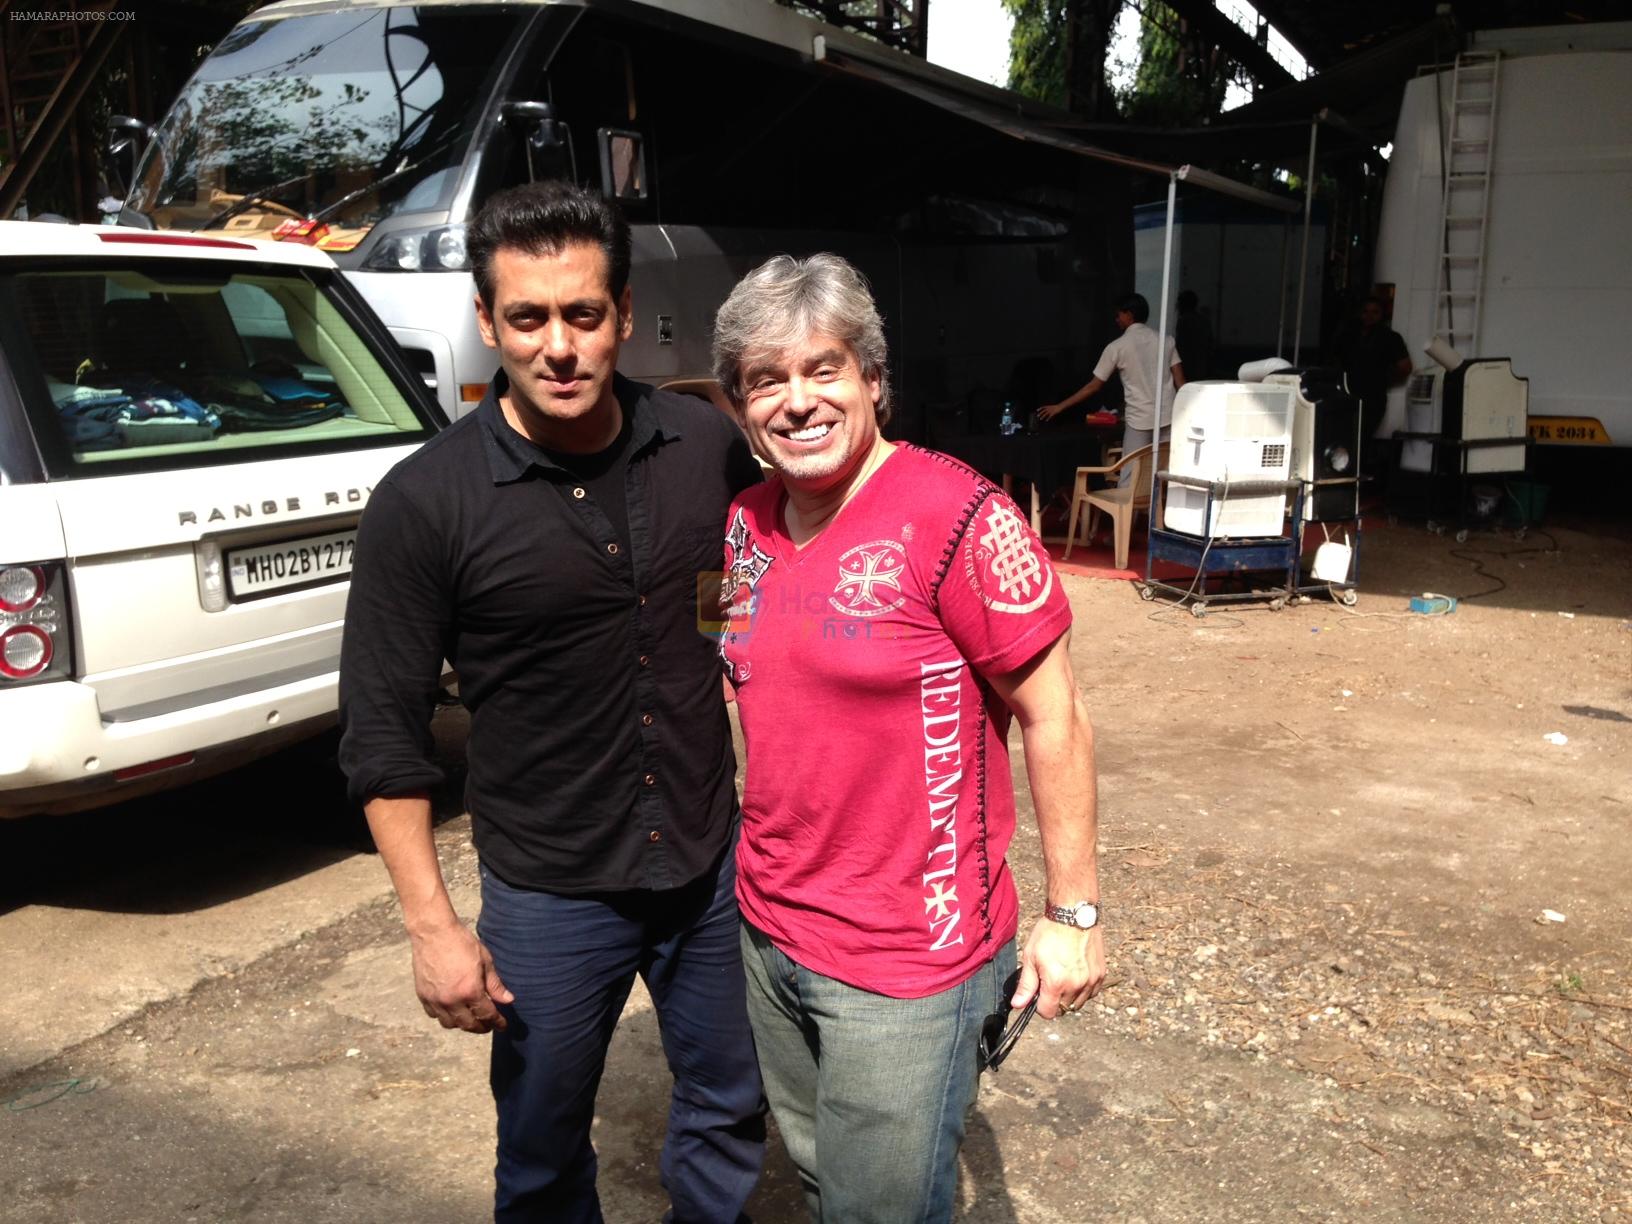 With Salman Khan-Mr Santiago Corrada � President & Chief Executive Officer of Visit Tampa Bay travelled to Mumbai and New Delhi ahead of IIFA�s American debut in Tampa Bay, Florida in June 2014